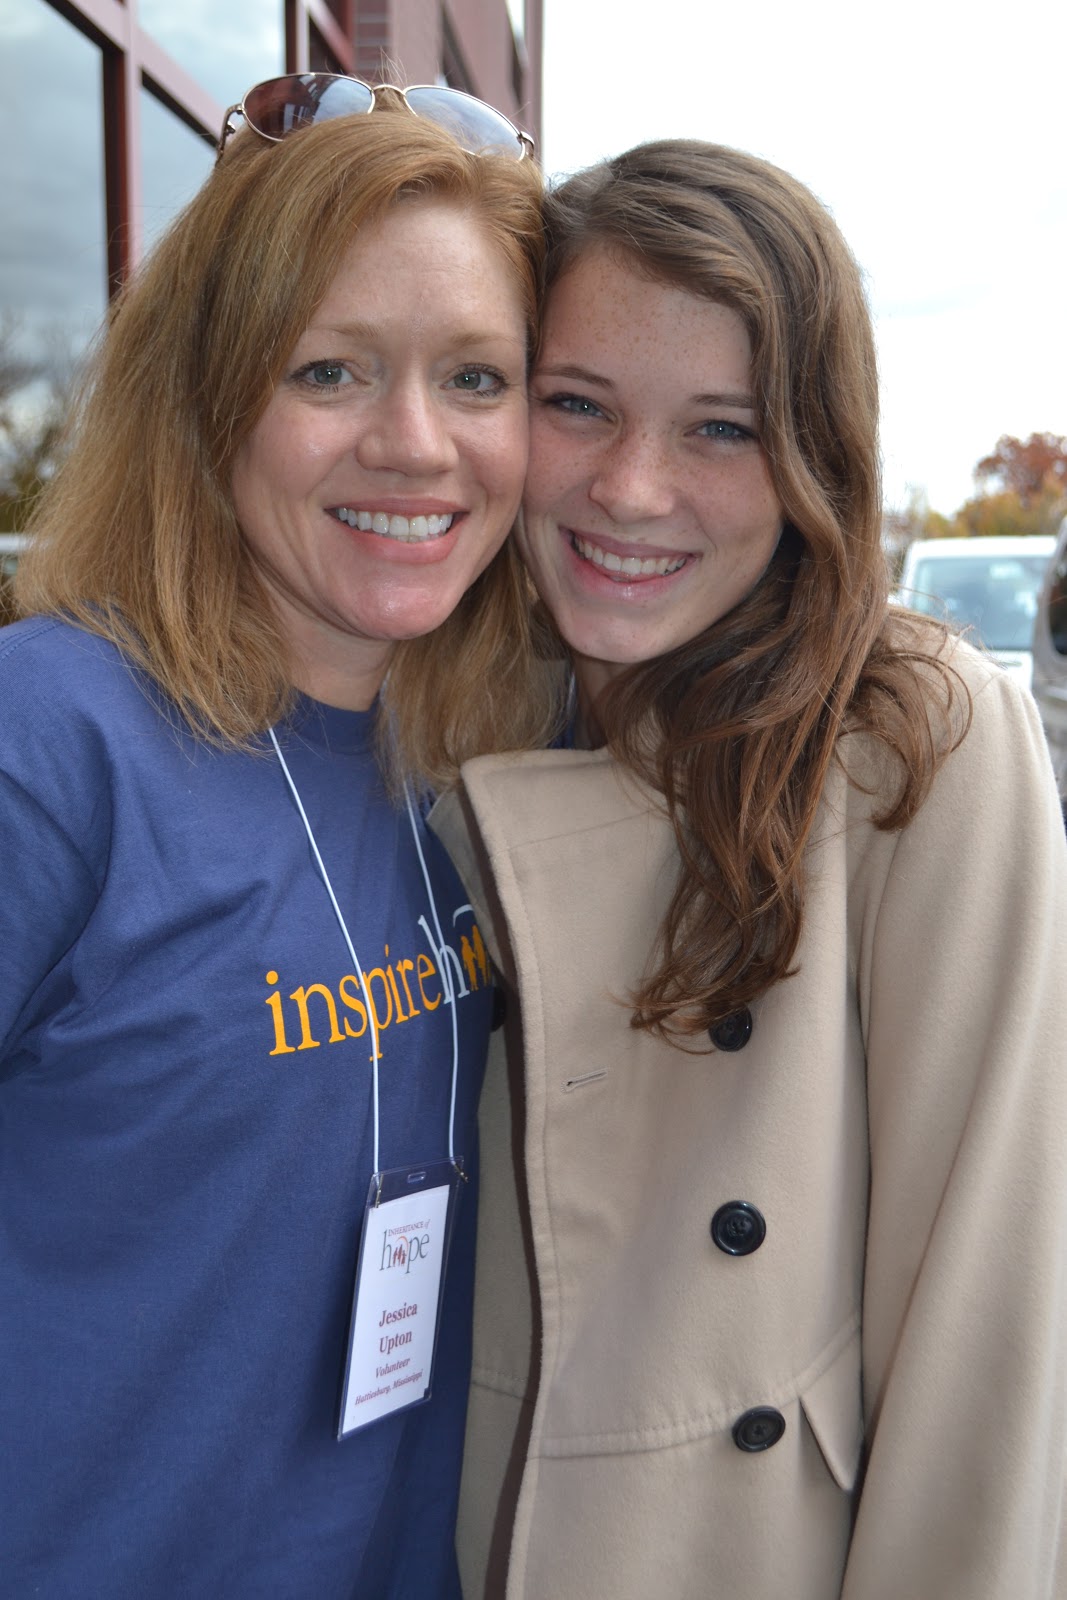 Lauren and her aunt served together at the NYC Legacy RetreatⓇ in 2016